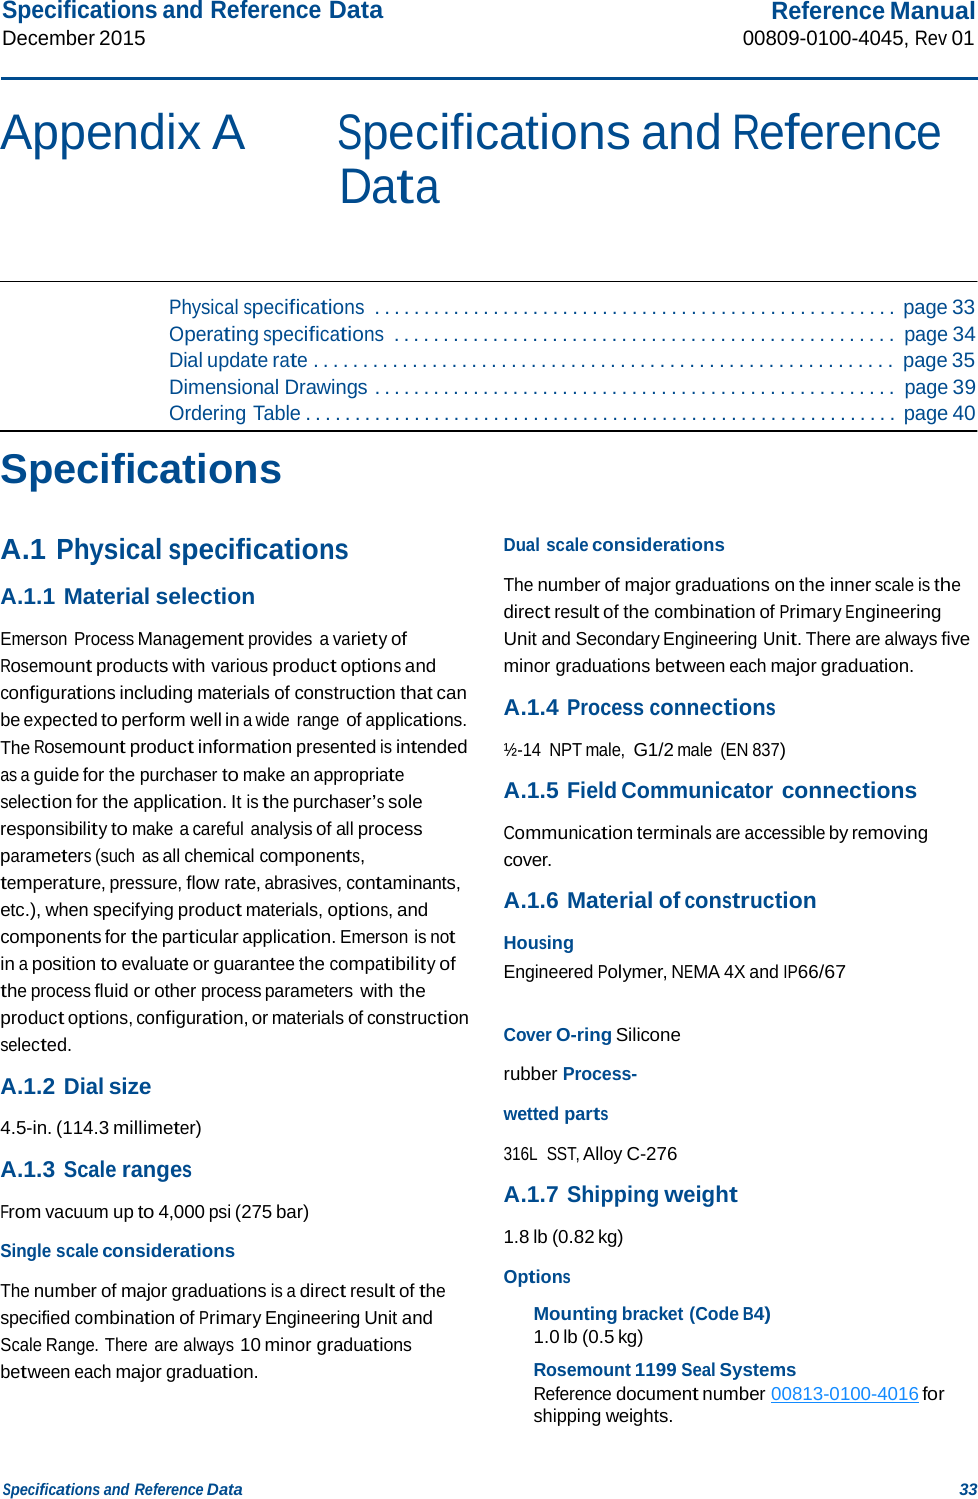 Specifications and Reference Data December 2015 Reference Manual 00809-0100-4045, Rev 01 Specifications and Reference Data 33    Appendix A Specifications and Reference Data     Physical specifications  . . . . . . . . . . . . . . . . . . . . . . . . . . . . . . . . . . . . . . . . . . . . . . . . . . . . . page 33 Operating specifications  . . . . . . . . . . . . . . . . . . . . . . . . . . . . . . . . . . . . . . . . . . . . . . . . . . . page 34 Dial update rate . . . . . . . . . . . . . . . . . . . . . . . . . . . . . . . . . . . . . . . . . . . . . . . . . . . . . . . . . . . page 35 Dimensional Drawings . . . . . . . . . . . . . . . . . . . . . . . . . . . . . . . . . . . . . . . . . . . . . . . . . . . . . page 39 Ordering Table . . . . . . . . . . . . . . . . . . . . . . . . . . . . . . . . . . . . . . . . . . . . . . . . . . . . . . . . . . . . page 40  Specifications   A.1 Physical specifications  A.1.1 Material selection  Emerson Process Management provides a variety of Rosemount products with various product options and configurations including materials of construction that can be expected to perform well in a wide range of applications. The Rosemount product information presented is intended as a guide for the purchaser to make an appropriate selection for the application. It is the purchaser’s sole responsibility to make a careful analysis of all process parameters (such as all chemical components, temperature, pressure, flow rate, abrasives, contaminants, etc.), when specifying product materials, options, and components for the particular application. Emerson is not in a position to evaluate or guarantee the compatibility of the process fluid or other process parameters with the product options, configuration, or materials of construction selected.  A.1.2 Dial size  4.5-in. (114.3 millimeter)  A.1.3 Scale ranges  From vacuum up to 4,000 psi (275 bar)  Single scale considerations  The number of major graduations is a direct result of the specified combination of Primary Engineering Unit and Scale Range. There are always 10 minor graduations between each major graduation. Dual scale considerations  The number of major graduations on the inner scale is the direct result of the combination of Primary Engineering Unit and Secondary Engineering Unit. There are always five minor graduations between each major graduation.  A.1.4 Process connections  ½-14  NPT male, G1/2 male  (EN 837)  A.1.5 Field Communicator connections  Communication terminals are accessible by removing cover.  A.1.6 Material of construction  Housing Engineered Polymer, NEMA 4X and IP66/67   Cover O-ring Silicone rubber Process-wetted parts 316L  SST, Alloy C-276  A.1.7 Shipping weight  1.8 lb (0.82 kg)  Options  Mounting bracket (Code B4) 1.0 lb (0.5 kg)  Rosemount 1199 Seal Systems Reference document number 00813-0100-4016 for shipping weights. 